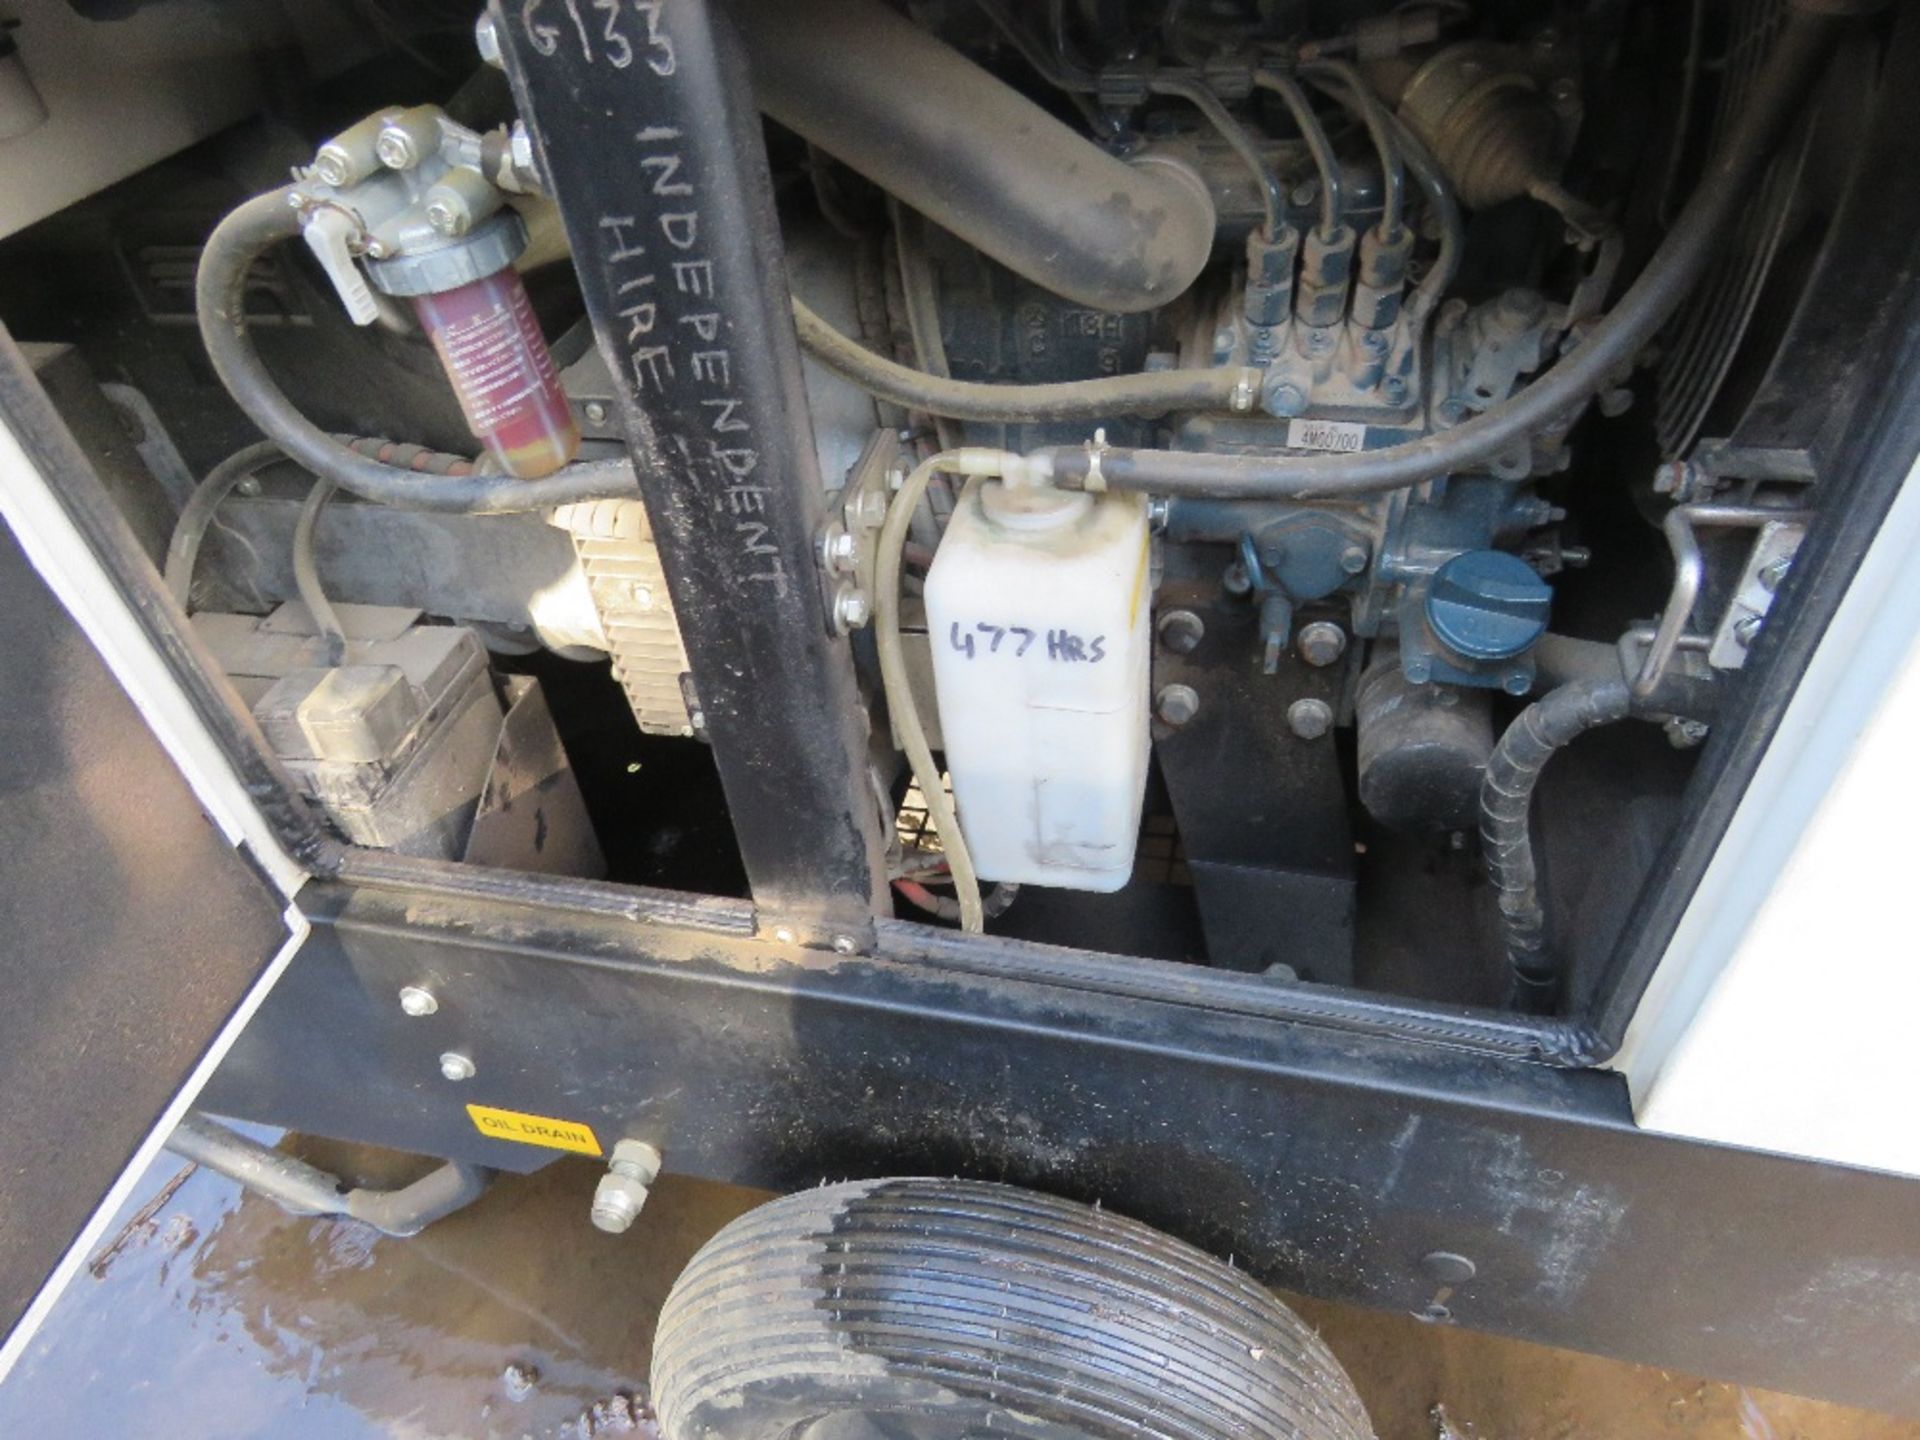 STEHILL 10KVA BARROW GENERATOR. WHEN TESTED WAS SEEN TO RUN AND SHOWED POWER ON GUAGE. KUBOTA ENGINE - Image 3 of 10